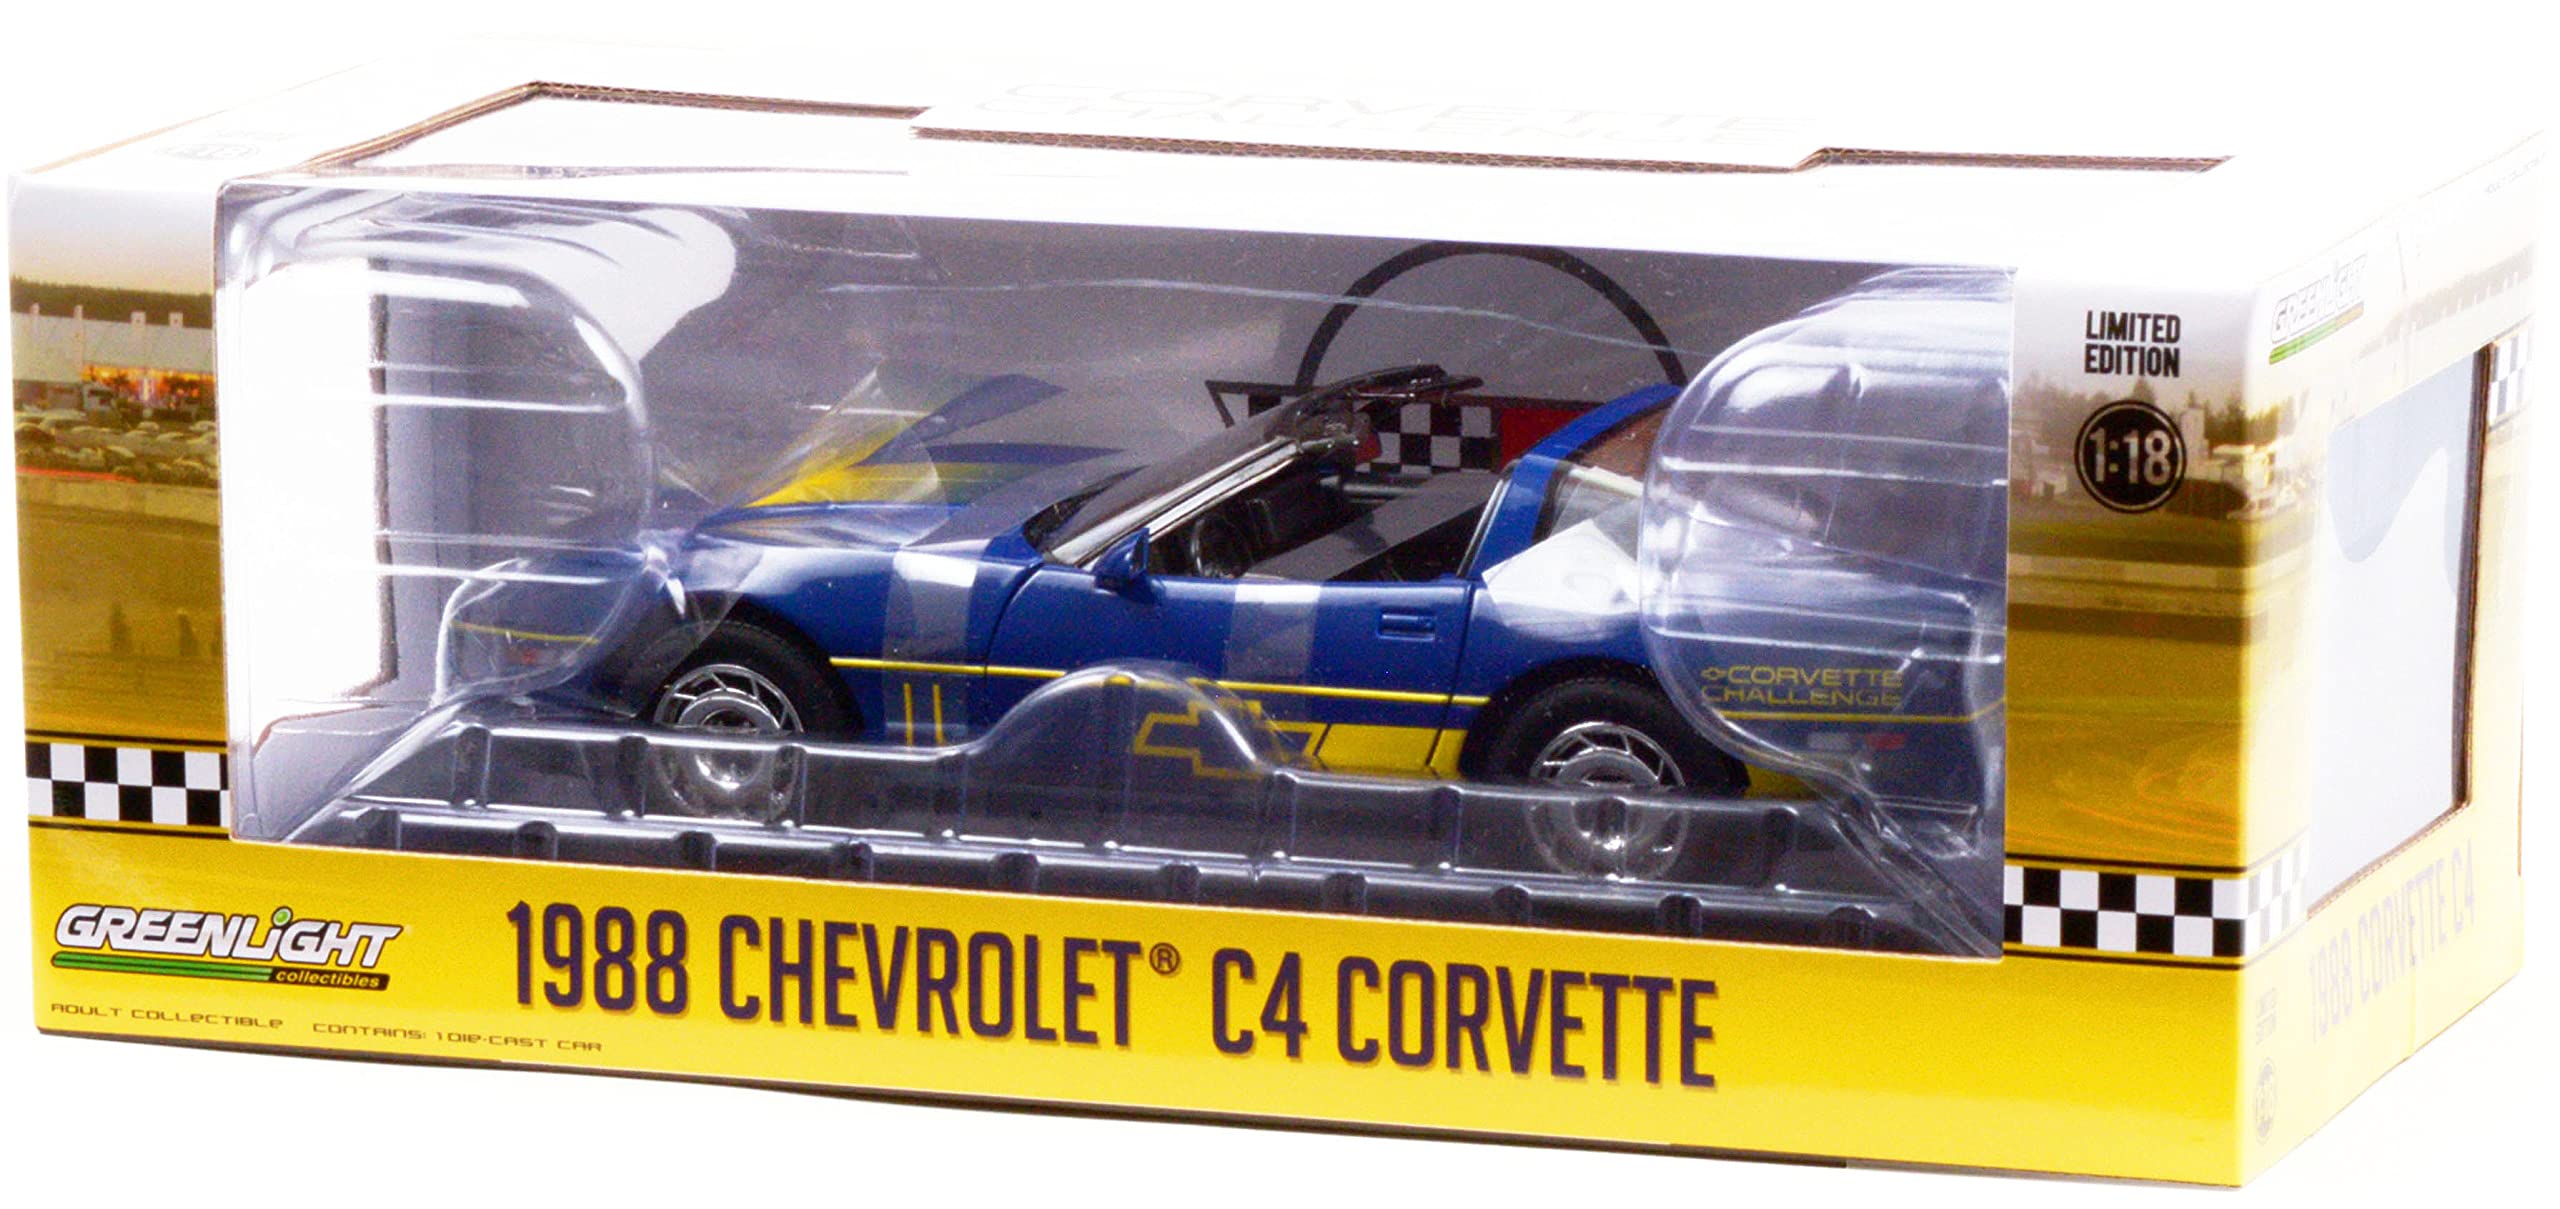 Greenlight Collectible 1988 Chevy Corvette C4 Dark Blue with Yellow Stripes Corvette Challenge Race Car 1/18 Diecast Model Car by Greenlight 13597